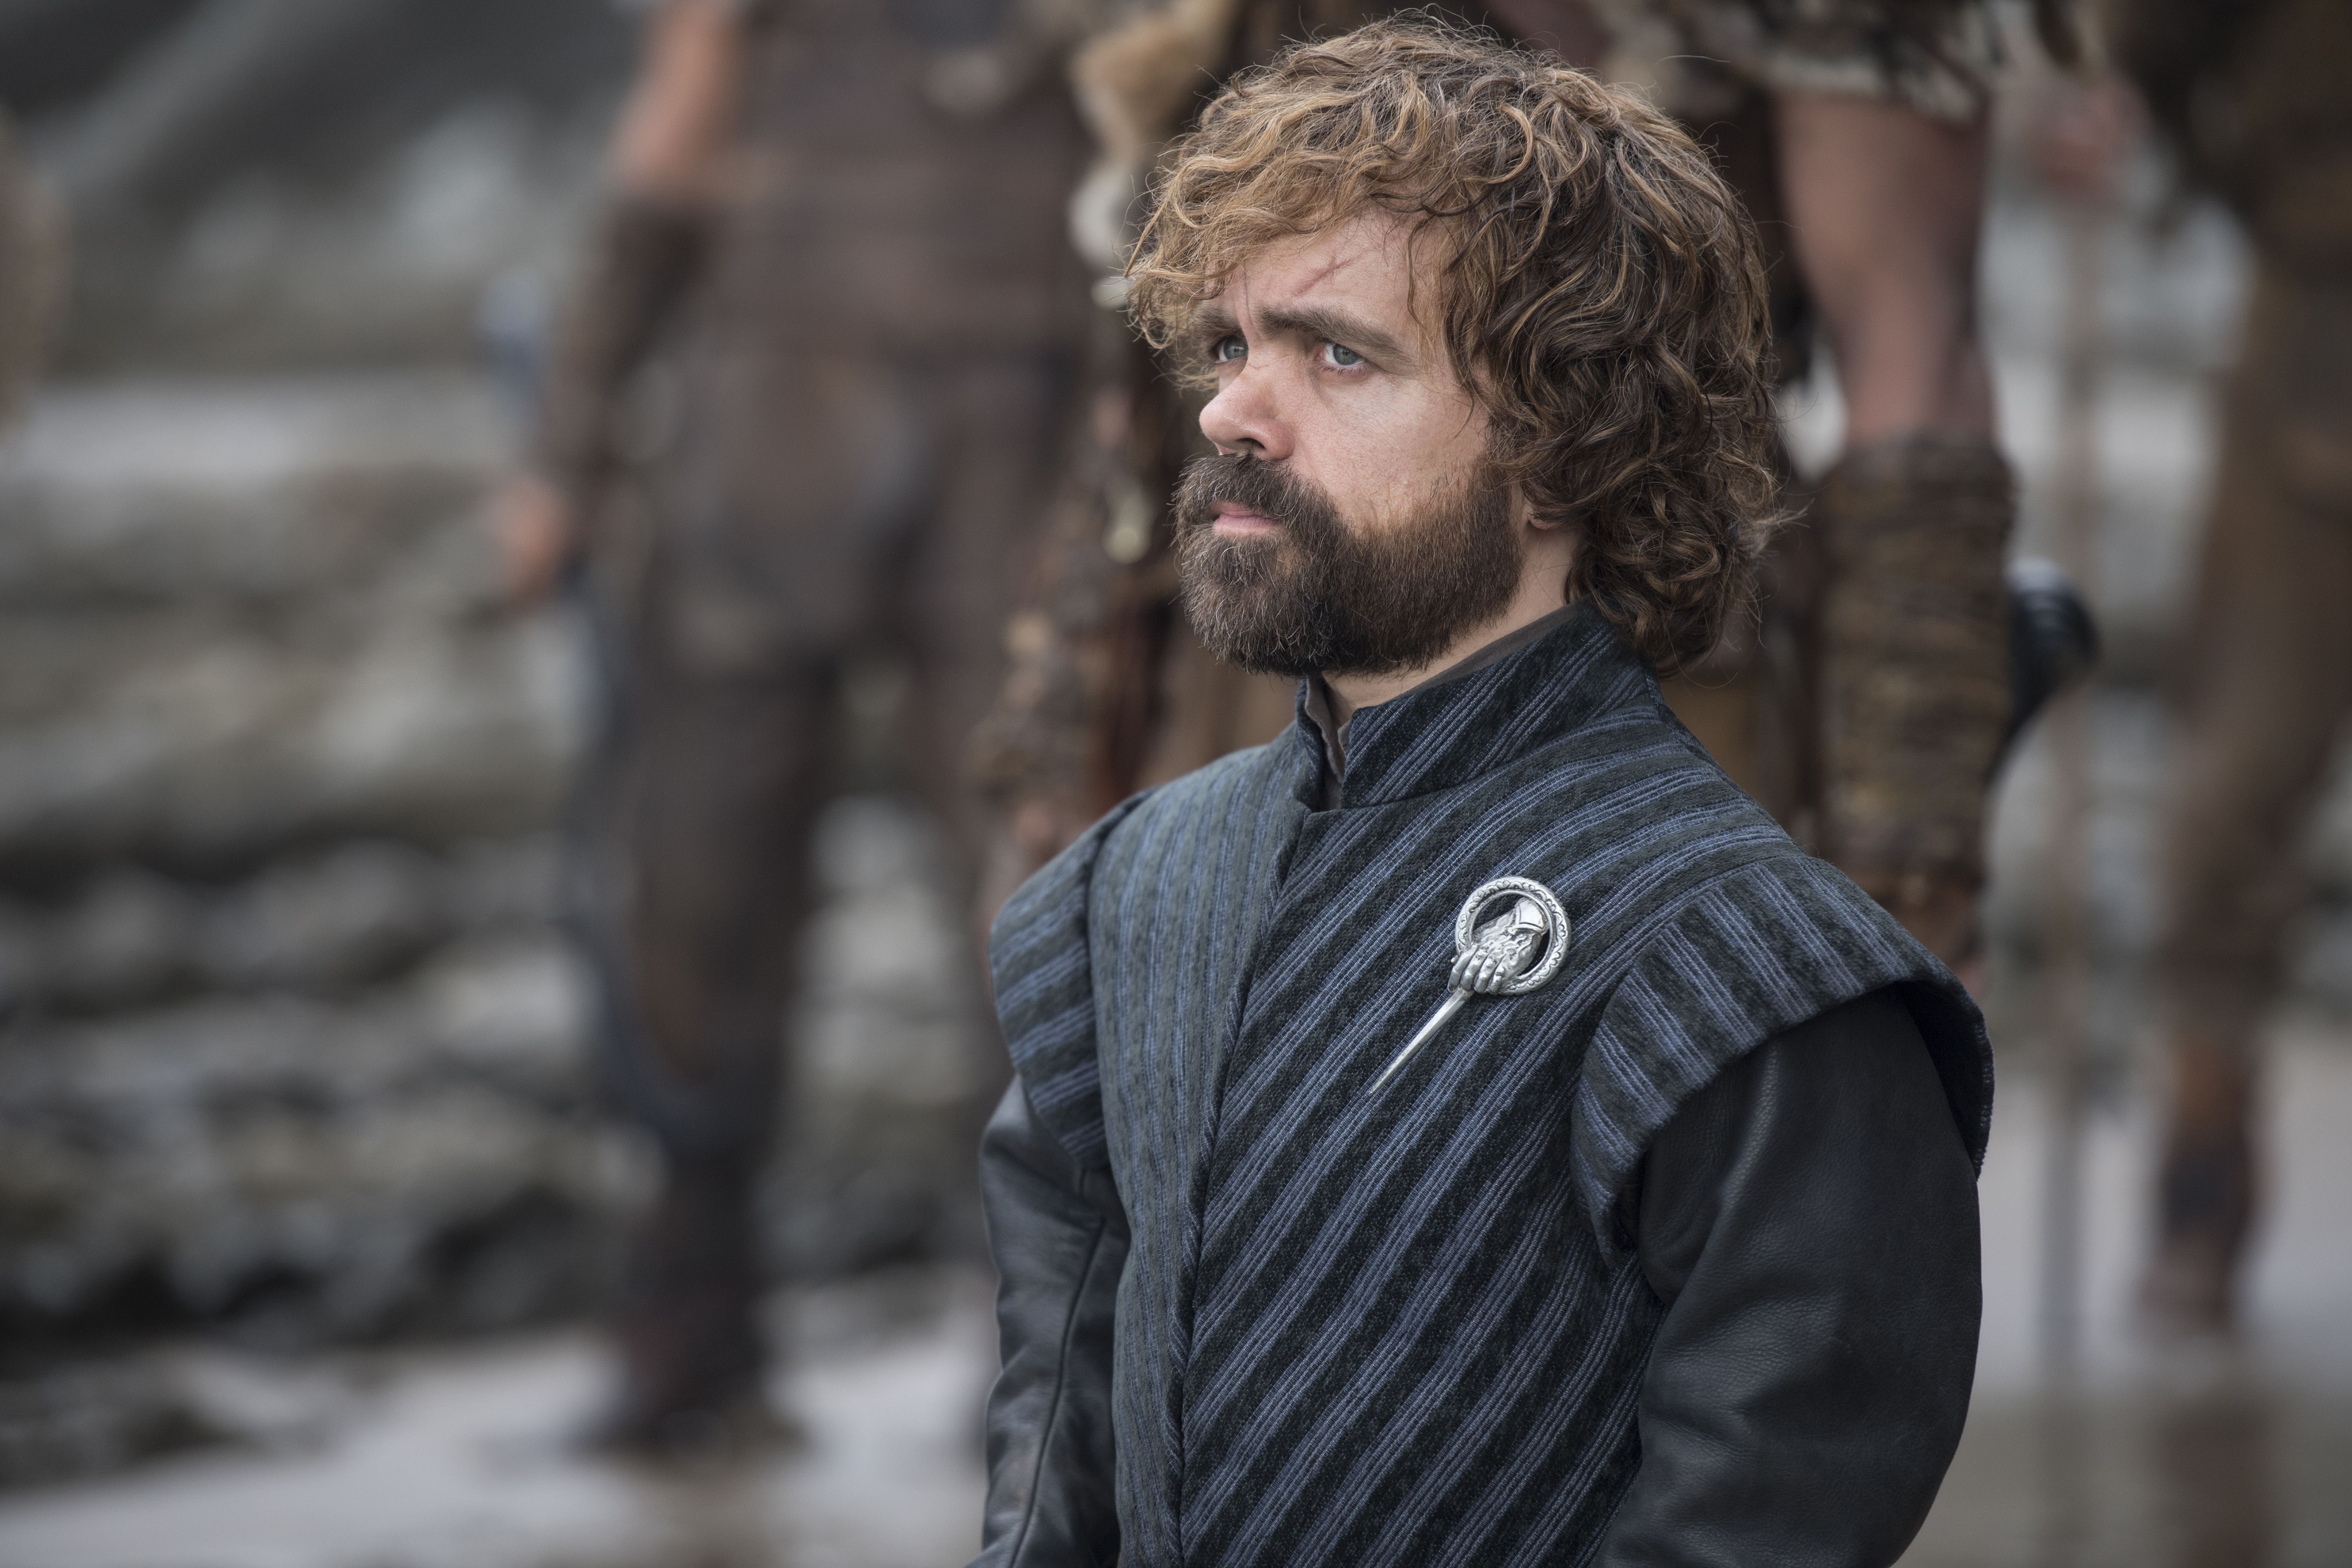 game of thrones6 Recapping Game of Thrones: The Queens Justice Finds Poetry in Westeros